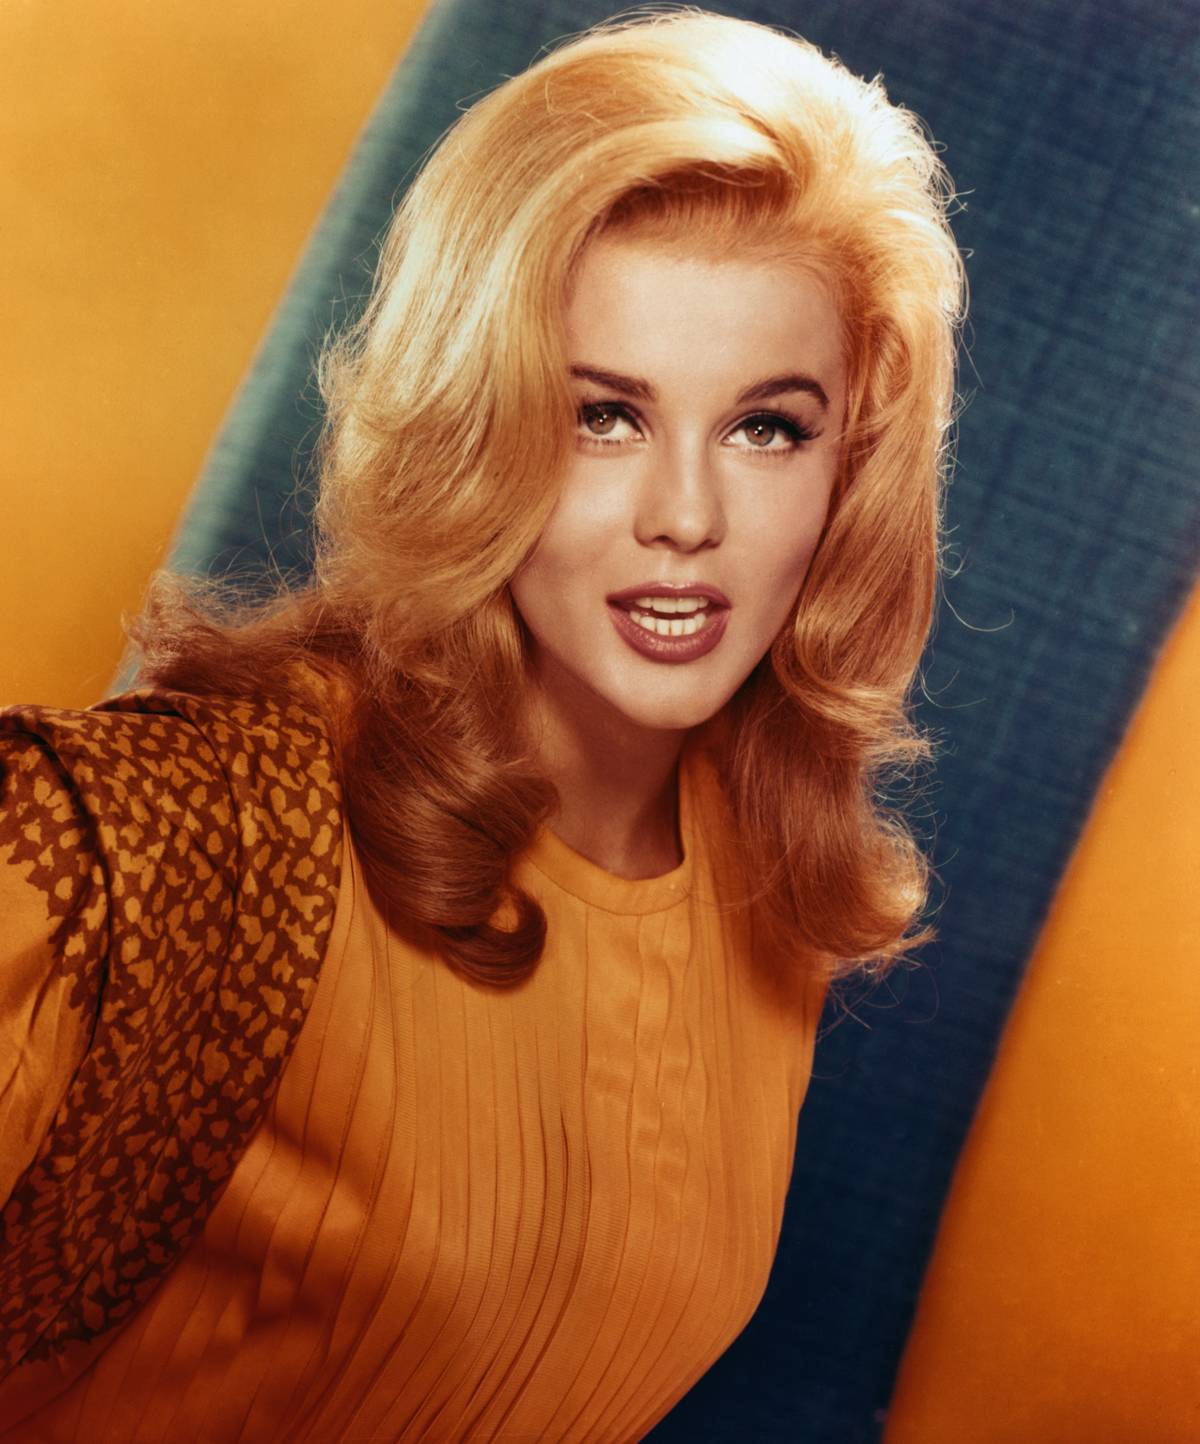 <p>Ann-Margret, a Swedish actress, arrived in Hollywood in the late 1950s, and her singing voice was compared to Elvis. This prompted them to work together, and she became known as the female version of him. </p> <p>She collaborated with The Jordanaires, his backup singers, and sang "Heartbreak Hotel," further increasing her fame.</p>